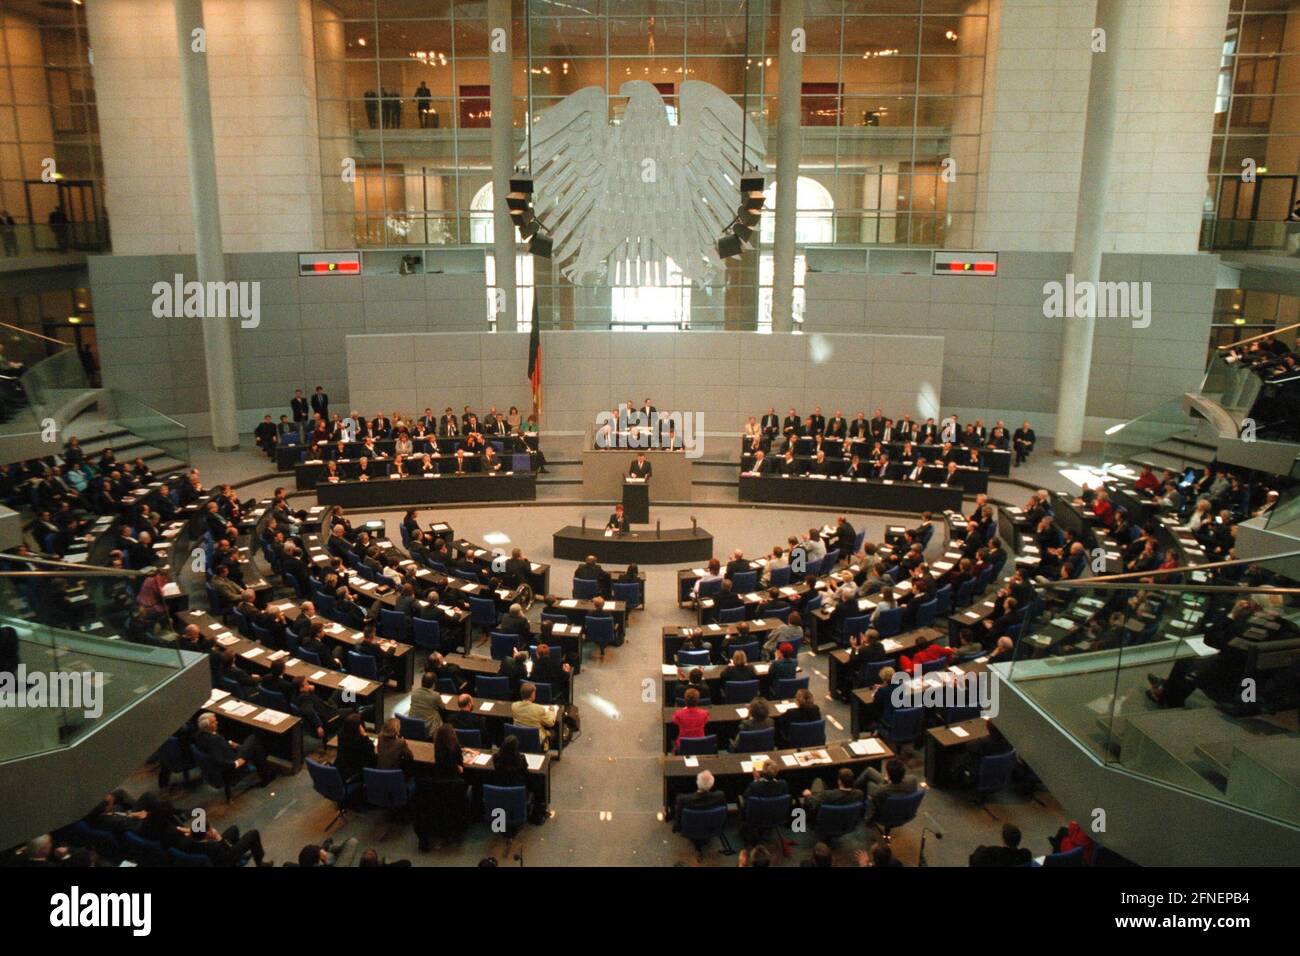 19.04.1999, Germany/Berlin: Opening session of the German Bundestag in the Reichstag. [automated translation] Stock Photo